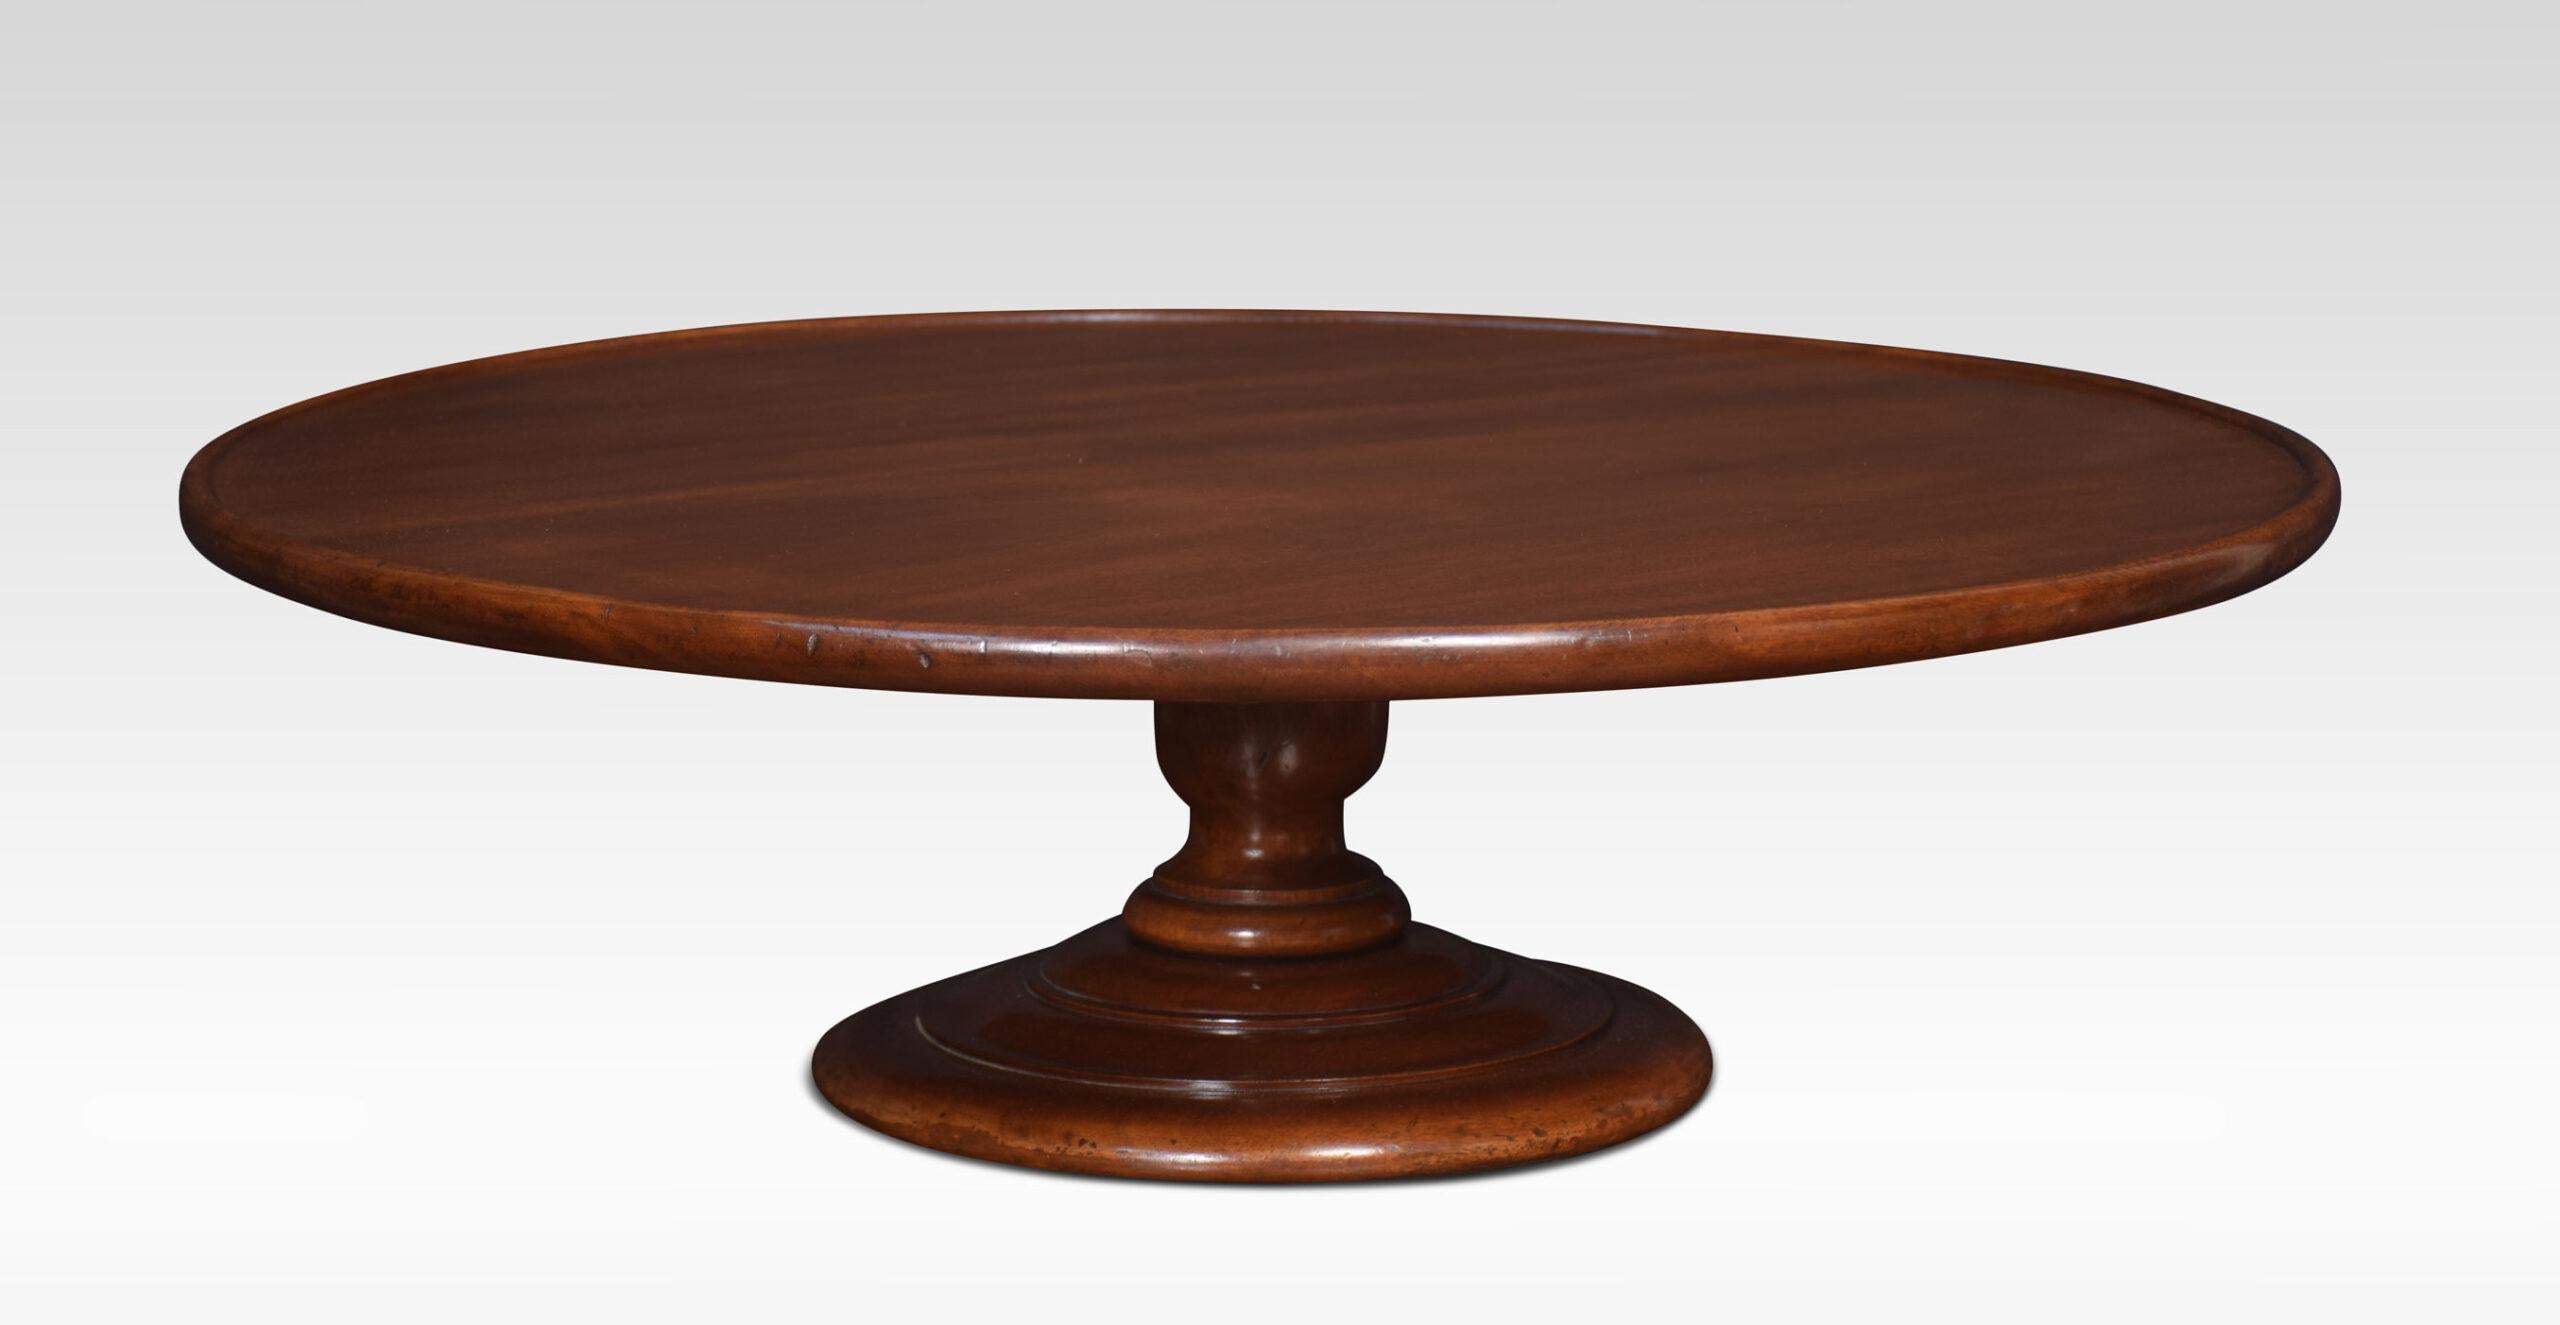 Mahogany Lazy Susan, the large circular top with molded edge raised up on circular stepped base.
Dimensions
Height 8.5 Inches
Width 28 Inches
Depth 28 Inches